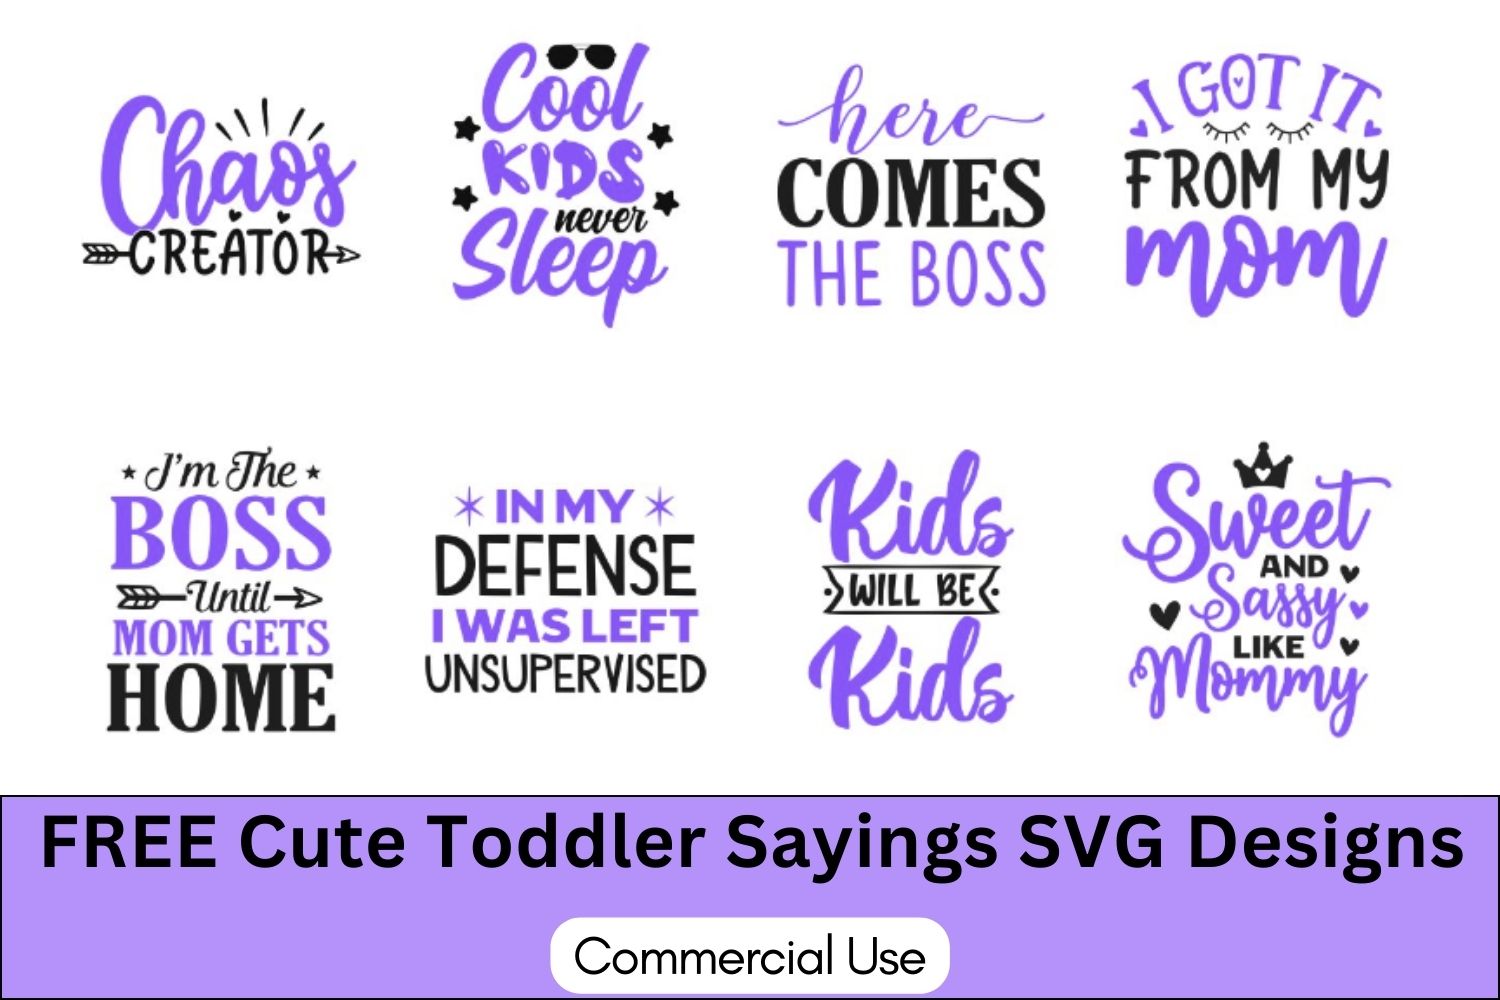 toddler sayings svgs, kids sayings, quotes, cricut, download, svg, clipart, designs, baby, free, funny, cool kids